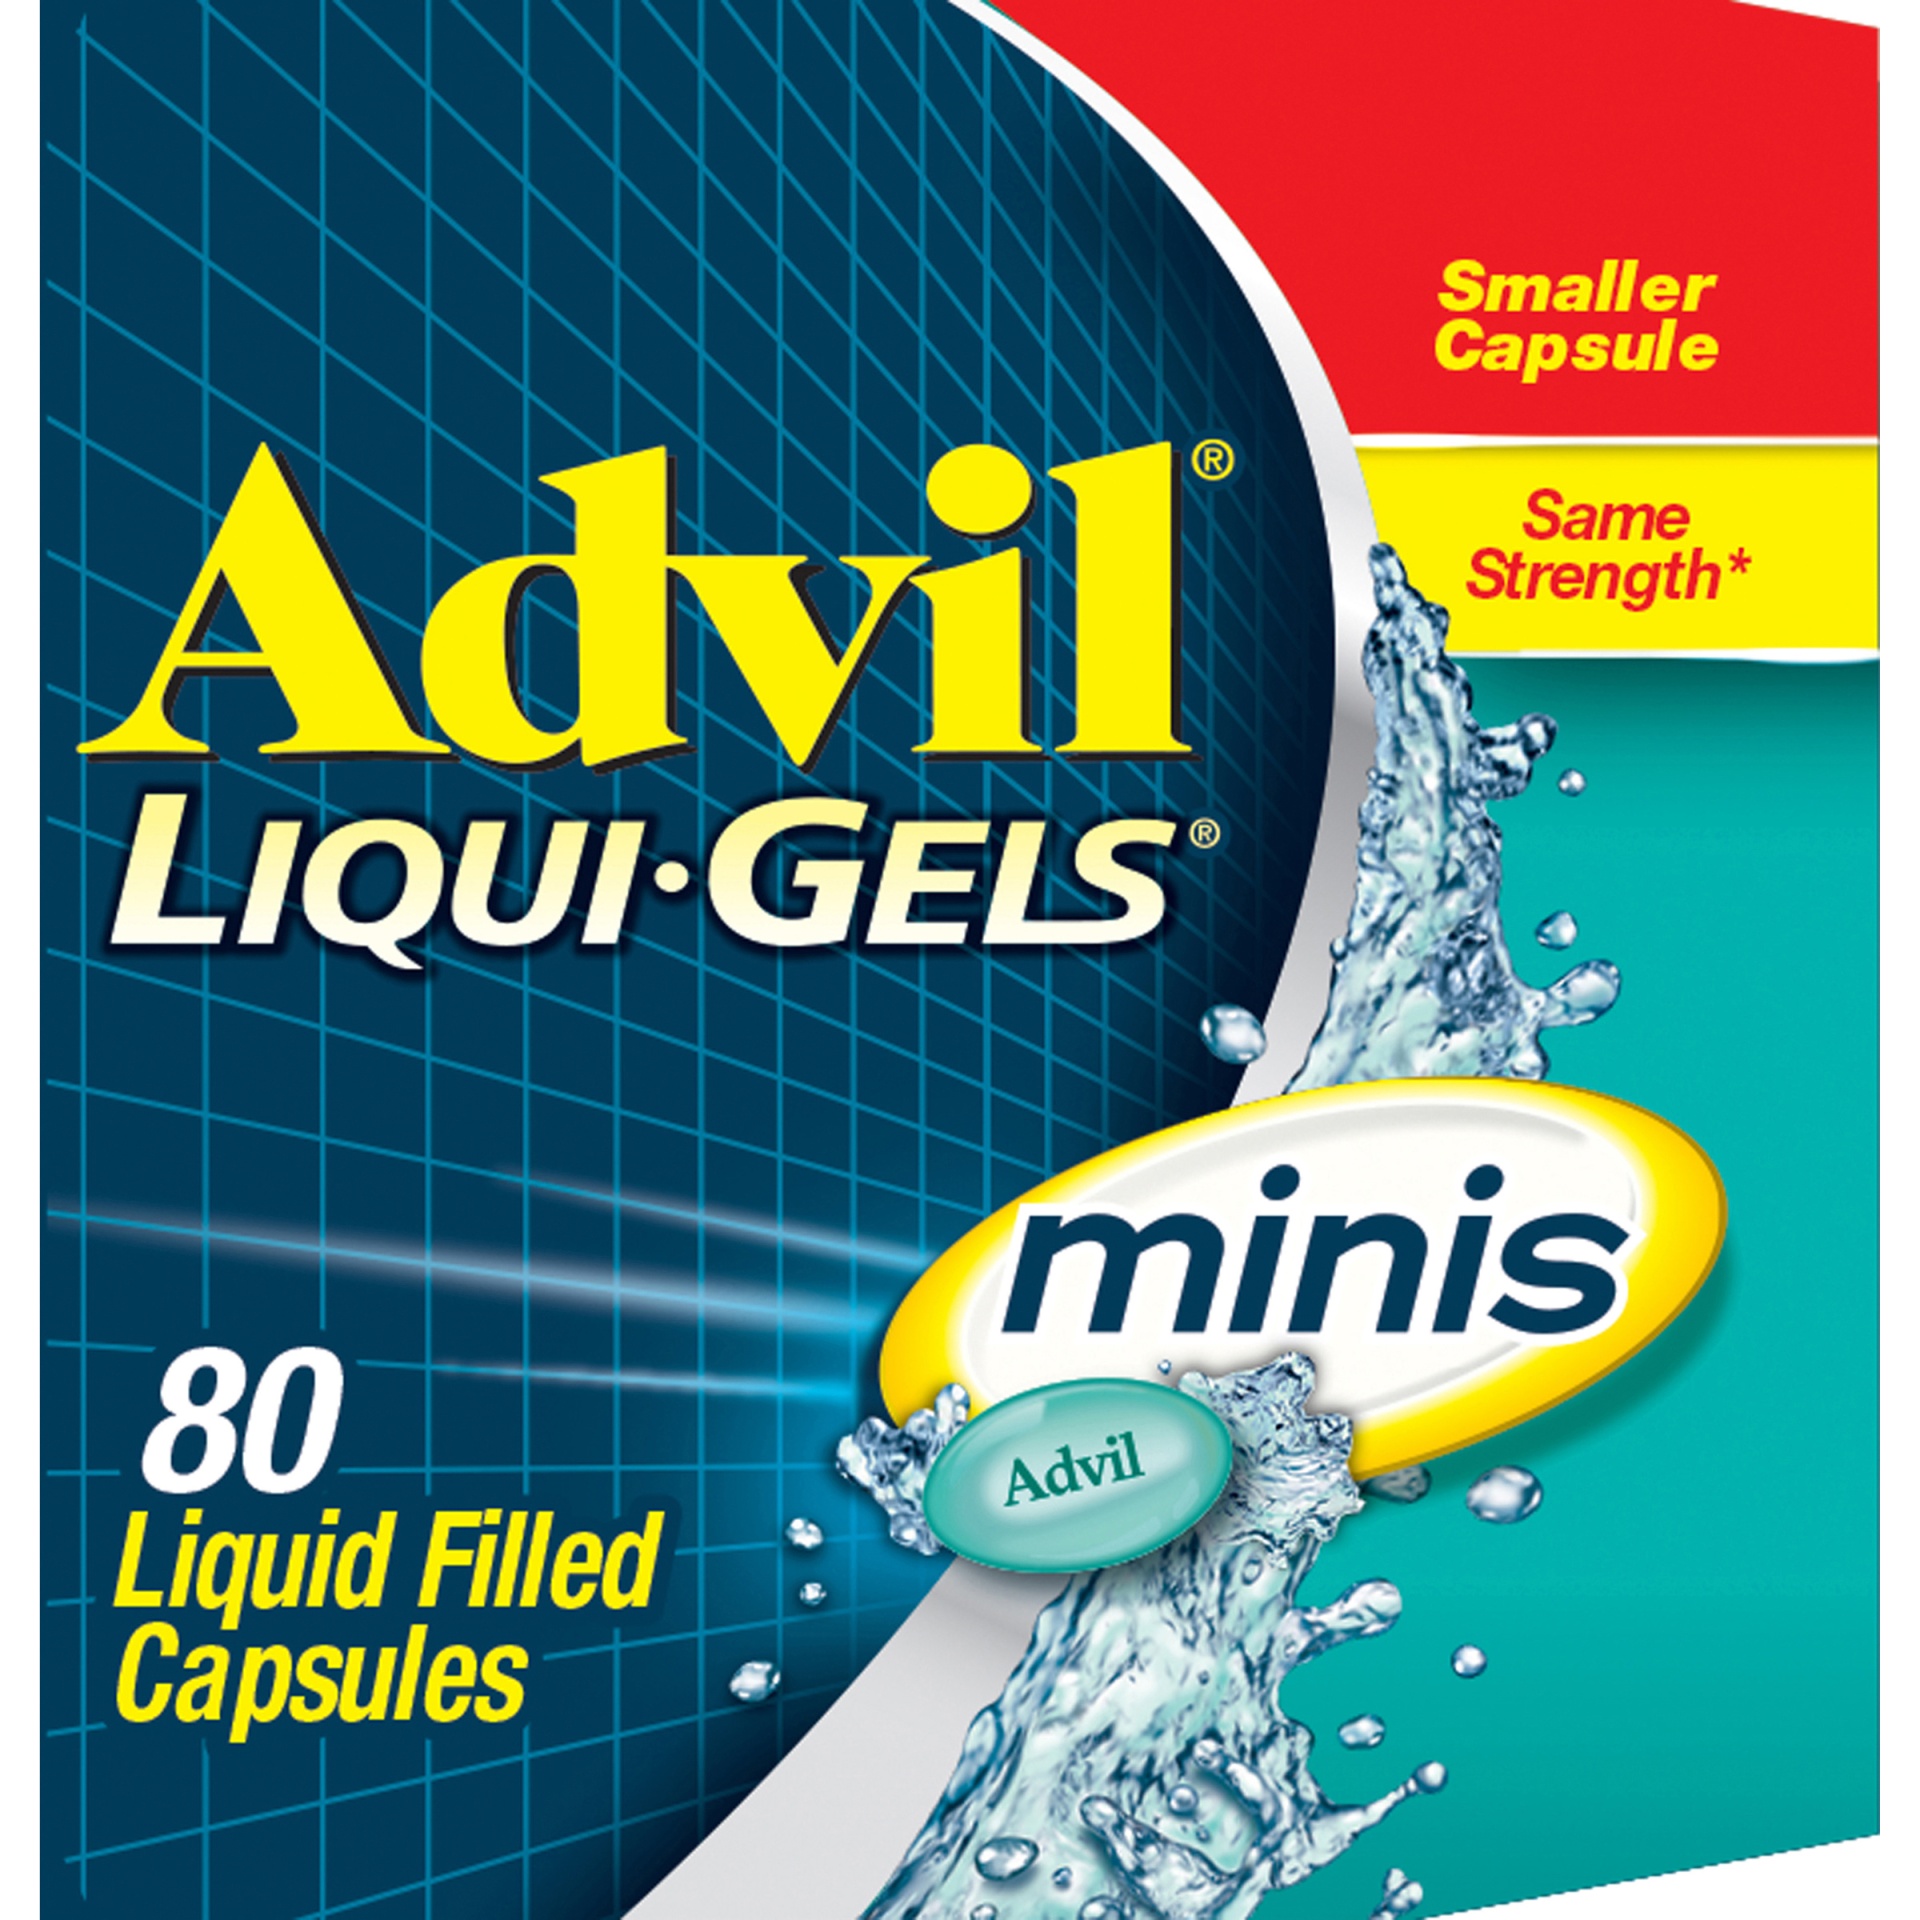 slide 5 of 7, Advil Liqui-Gels minis Pain Reliever and Fever Reducer, Ibuprofen 200mg for Pain Relief - 80 Liquid Filled Capsules, 80 ct